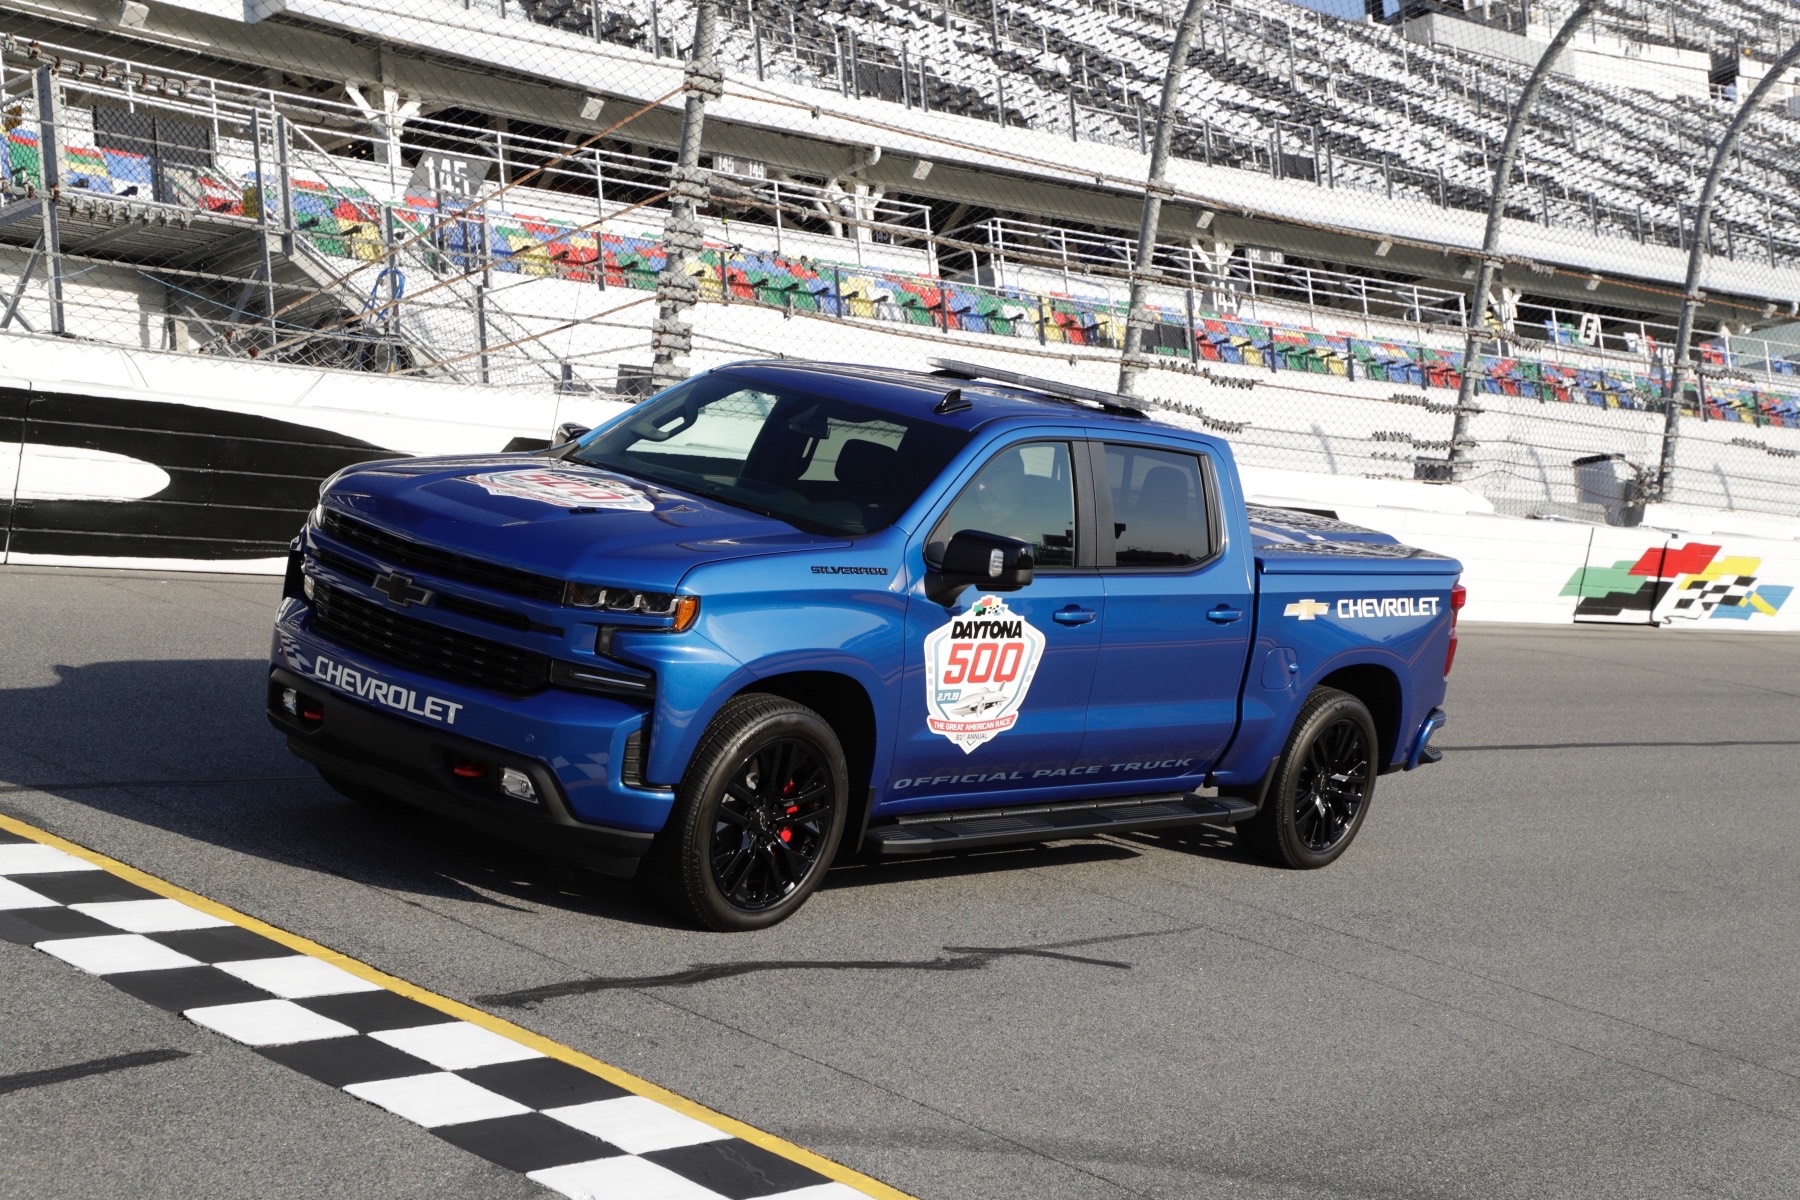 The Daytona 500 Has A New Pace Car Only This Time It's A Chevy